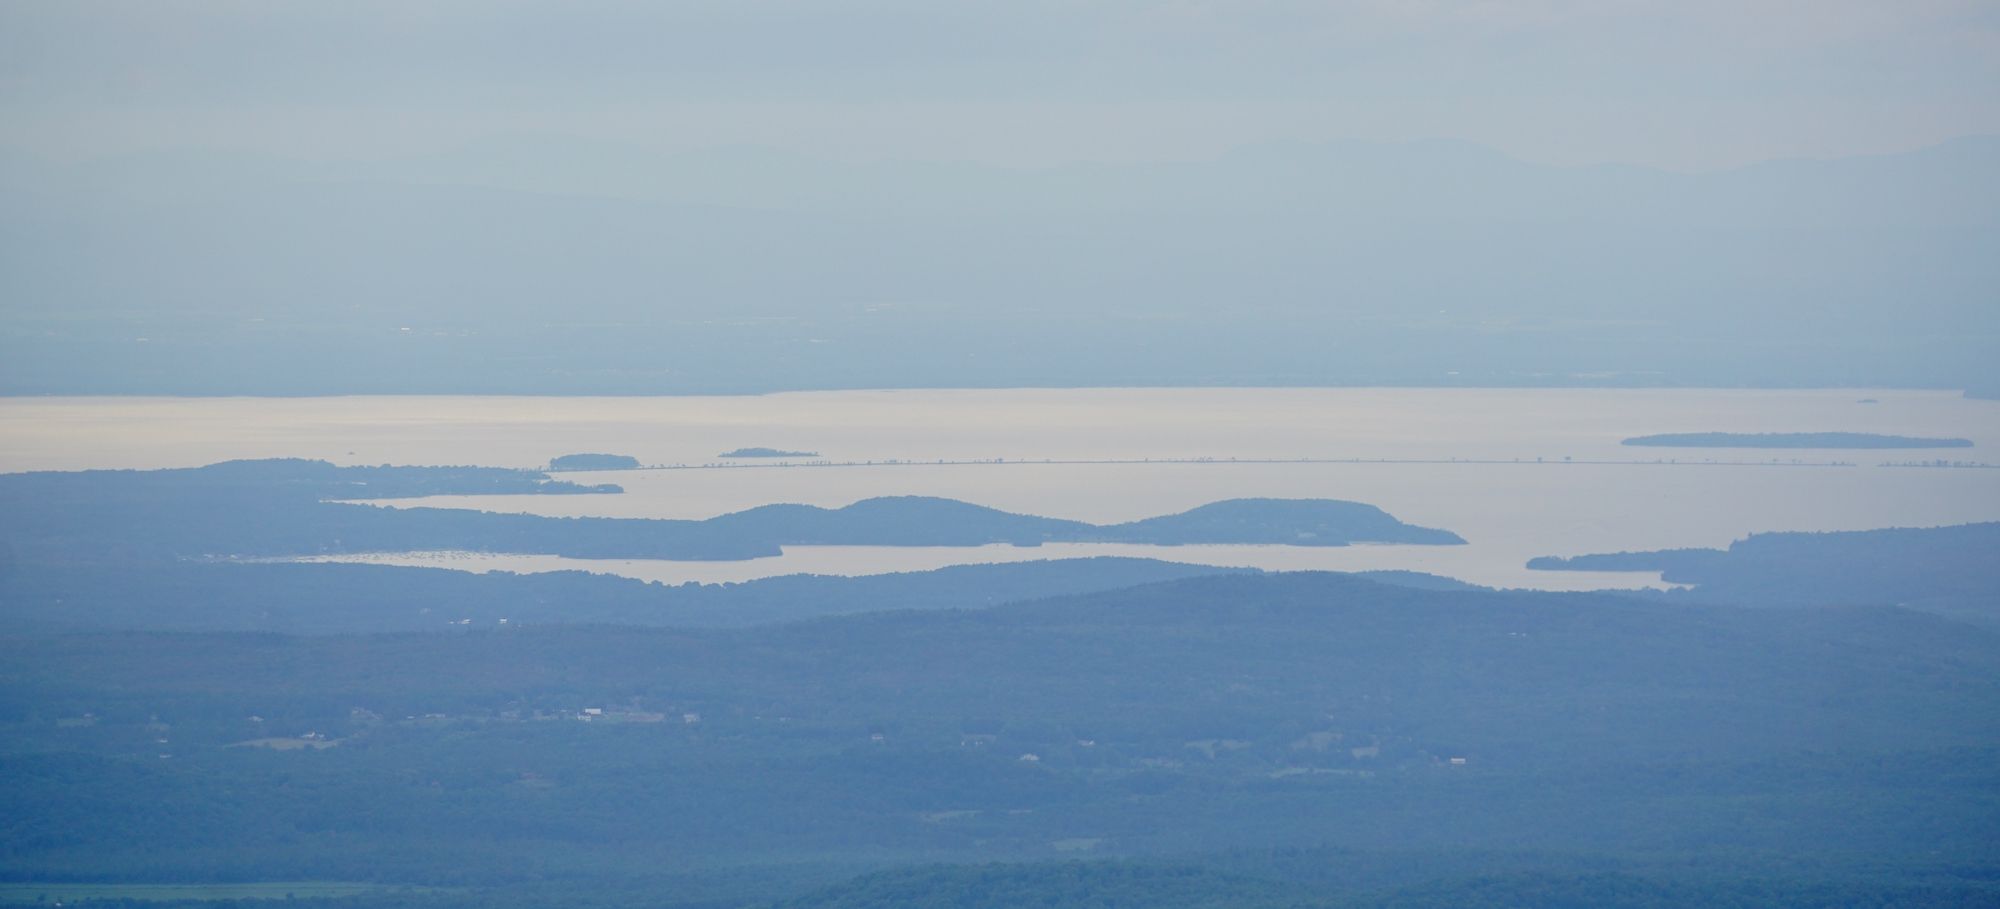 Lake Champlain in the distance from the summit of Mount Mansfield.